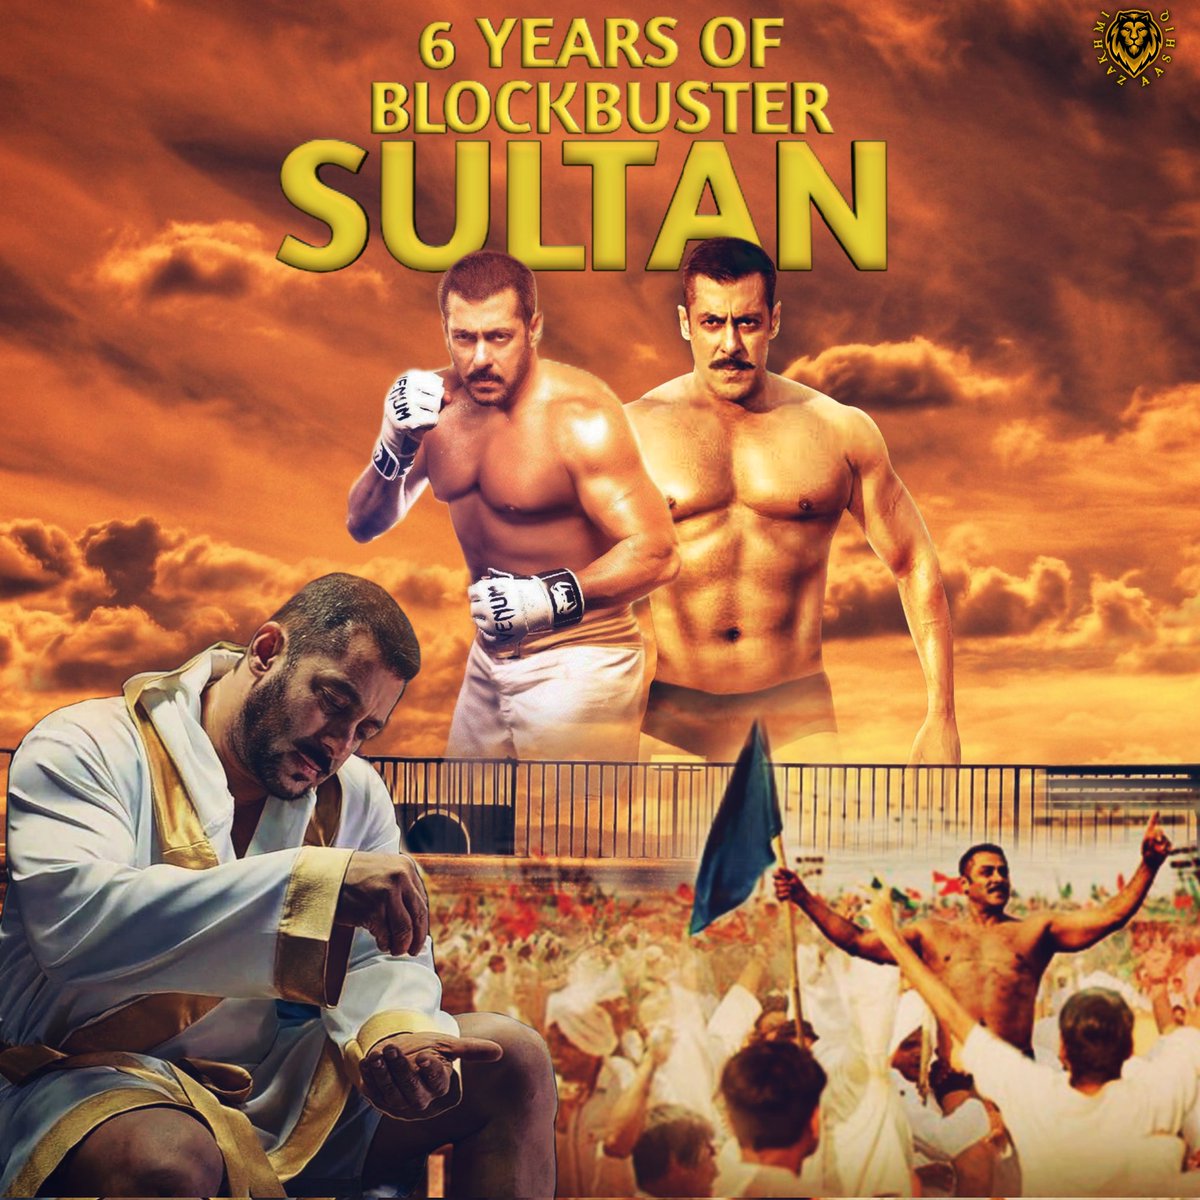 Dear Salmaniacs, we are celebrating
6th anni of Megastar #SalmanKhan's MEGA BLOCKBUSTER #Sultan. Film was no less than a Tsunami at the BO when it was released. One of the best movies of last decade.

Let's start the MEGA CELEBRATION by trending 